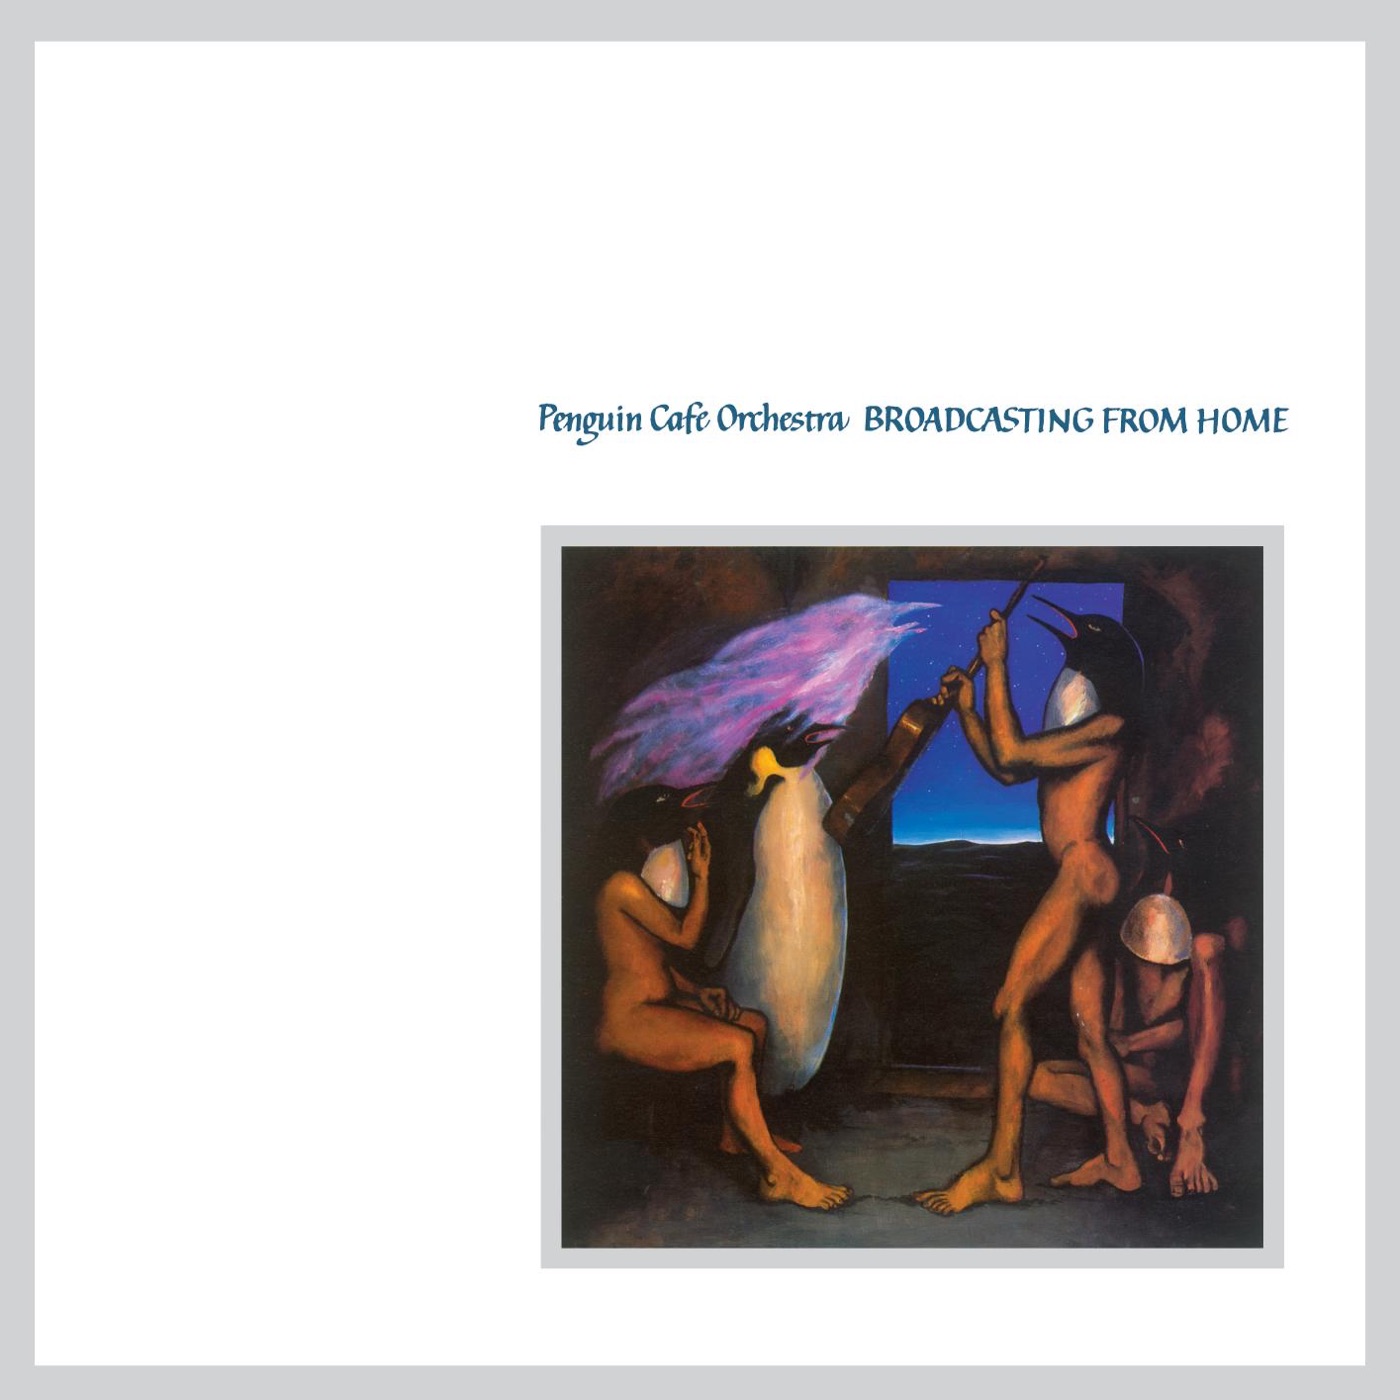 Broadcasting from Home by Penguin Cafe Orchestra